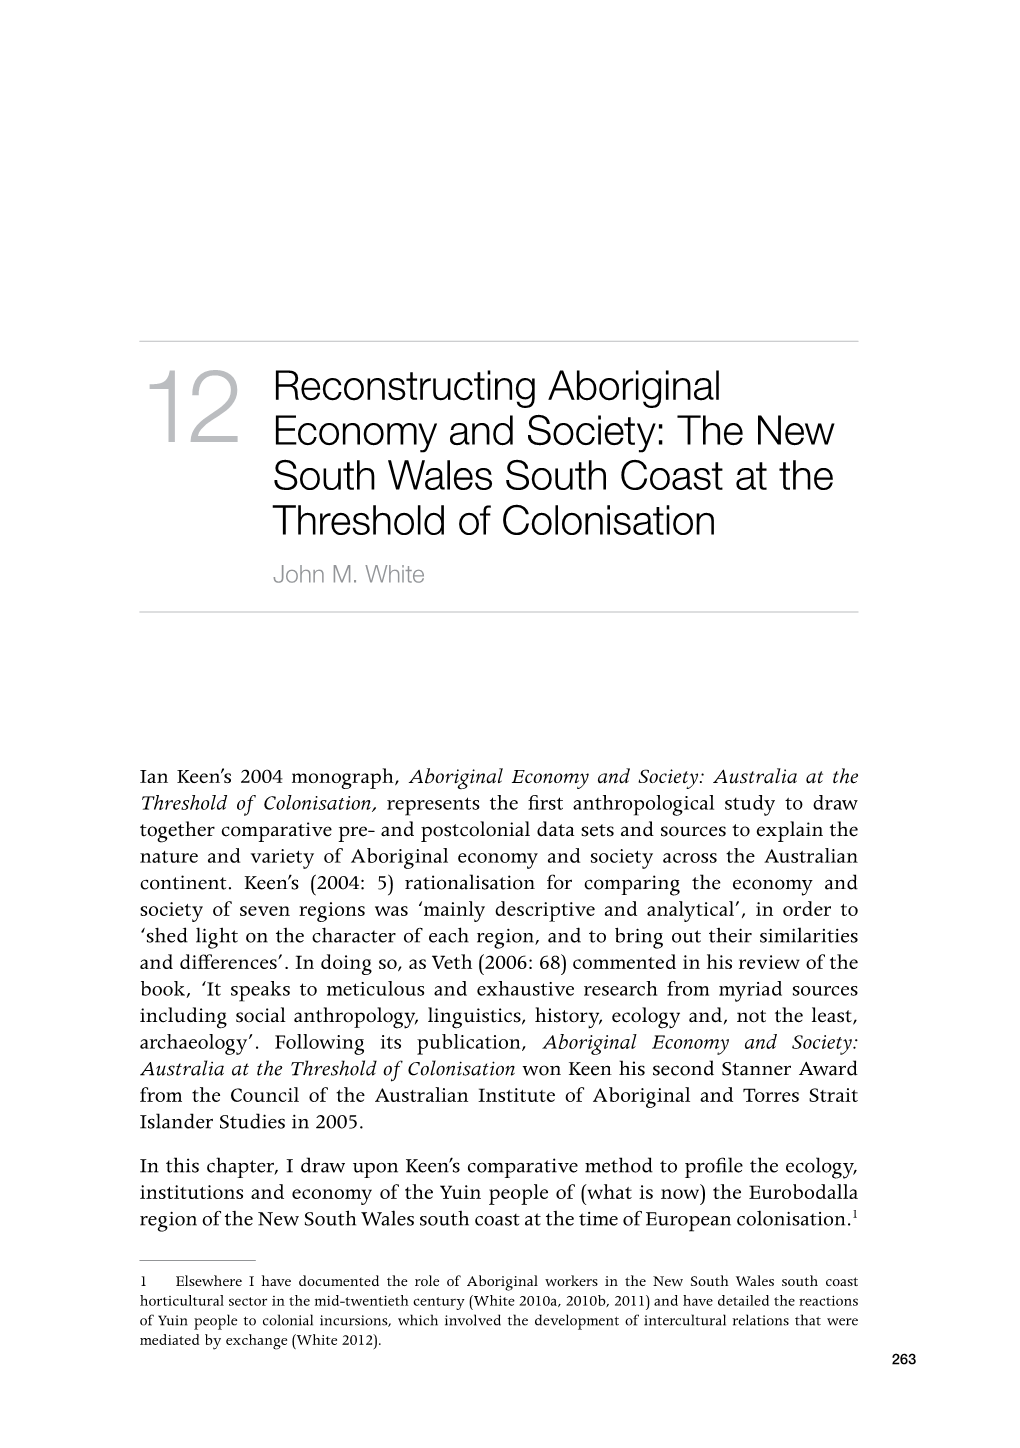 Reconstructing Aboriginal Economy and Society: the New South Wales